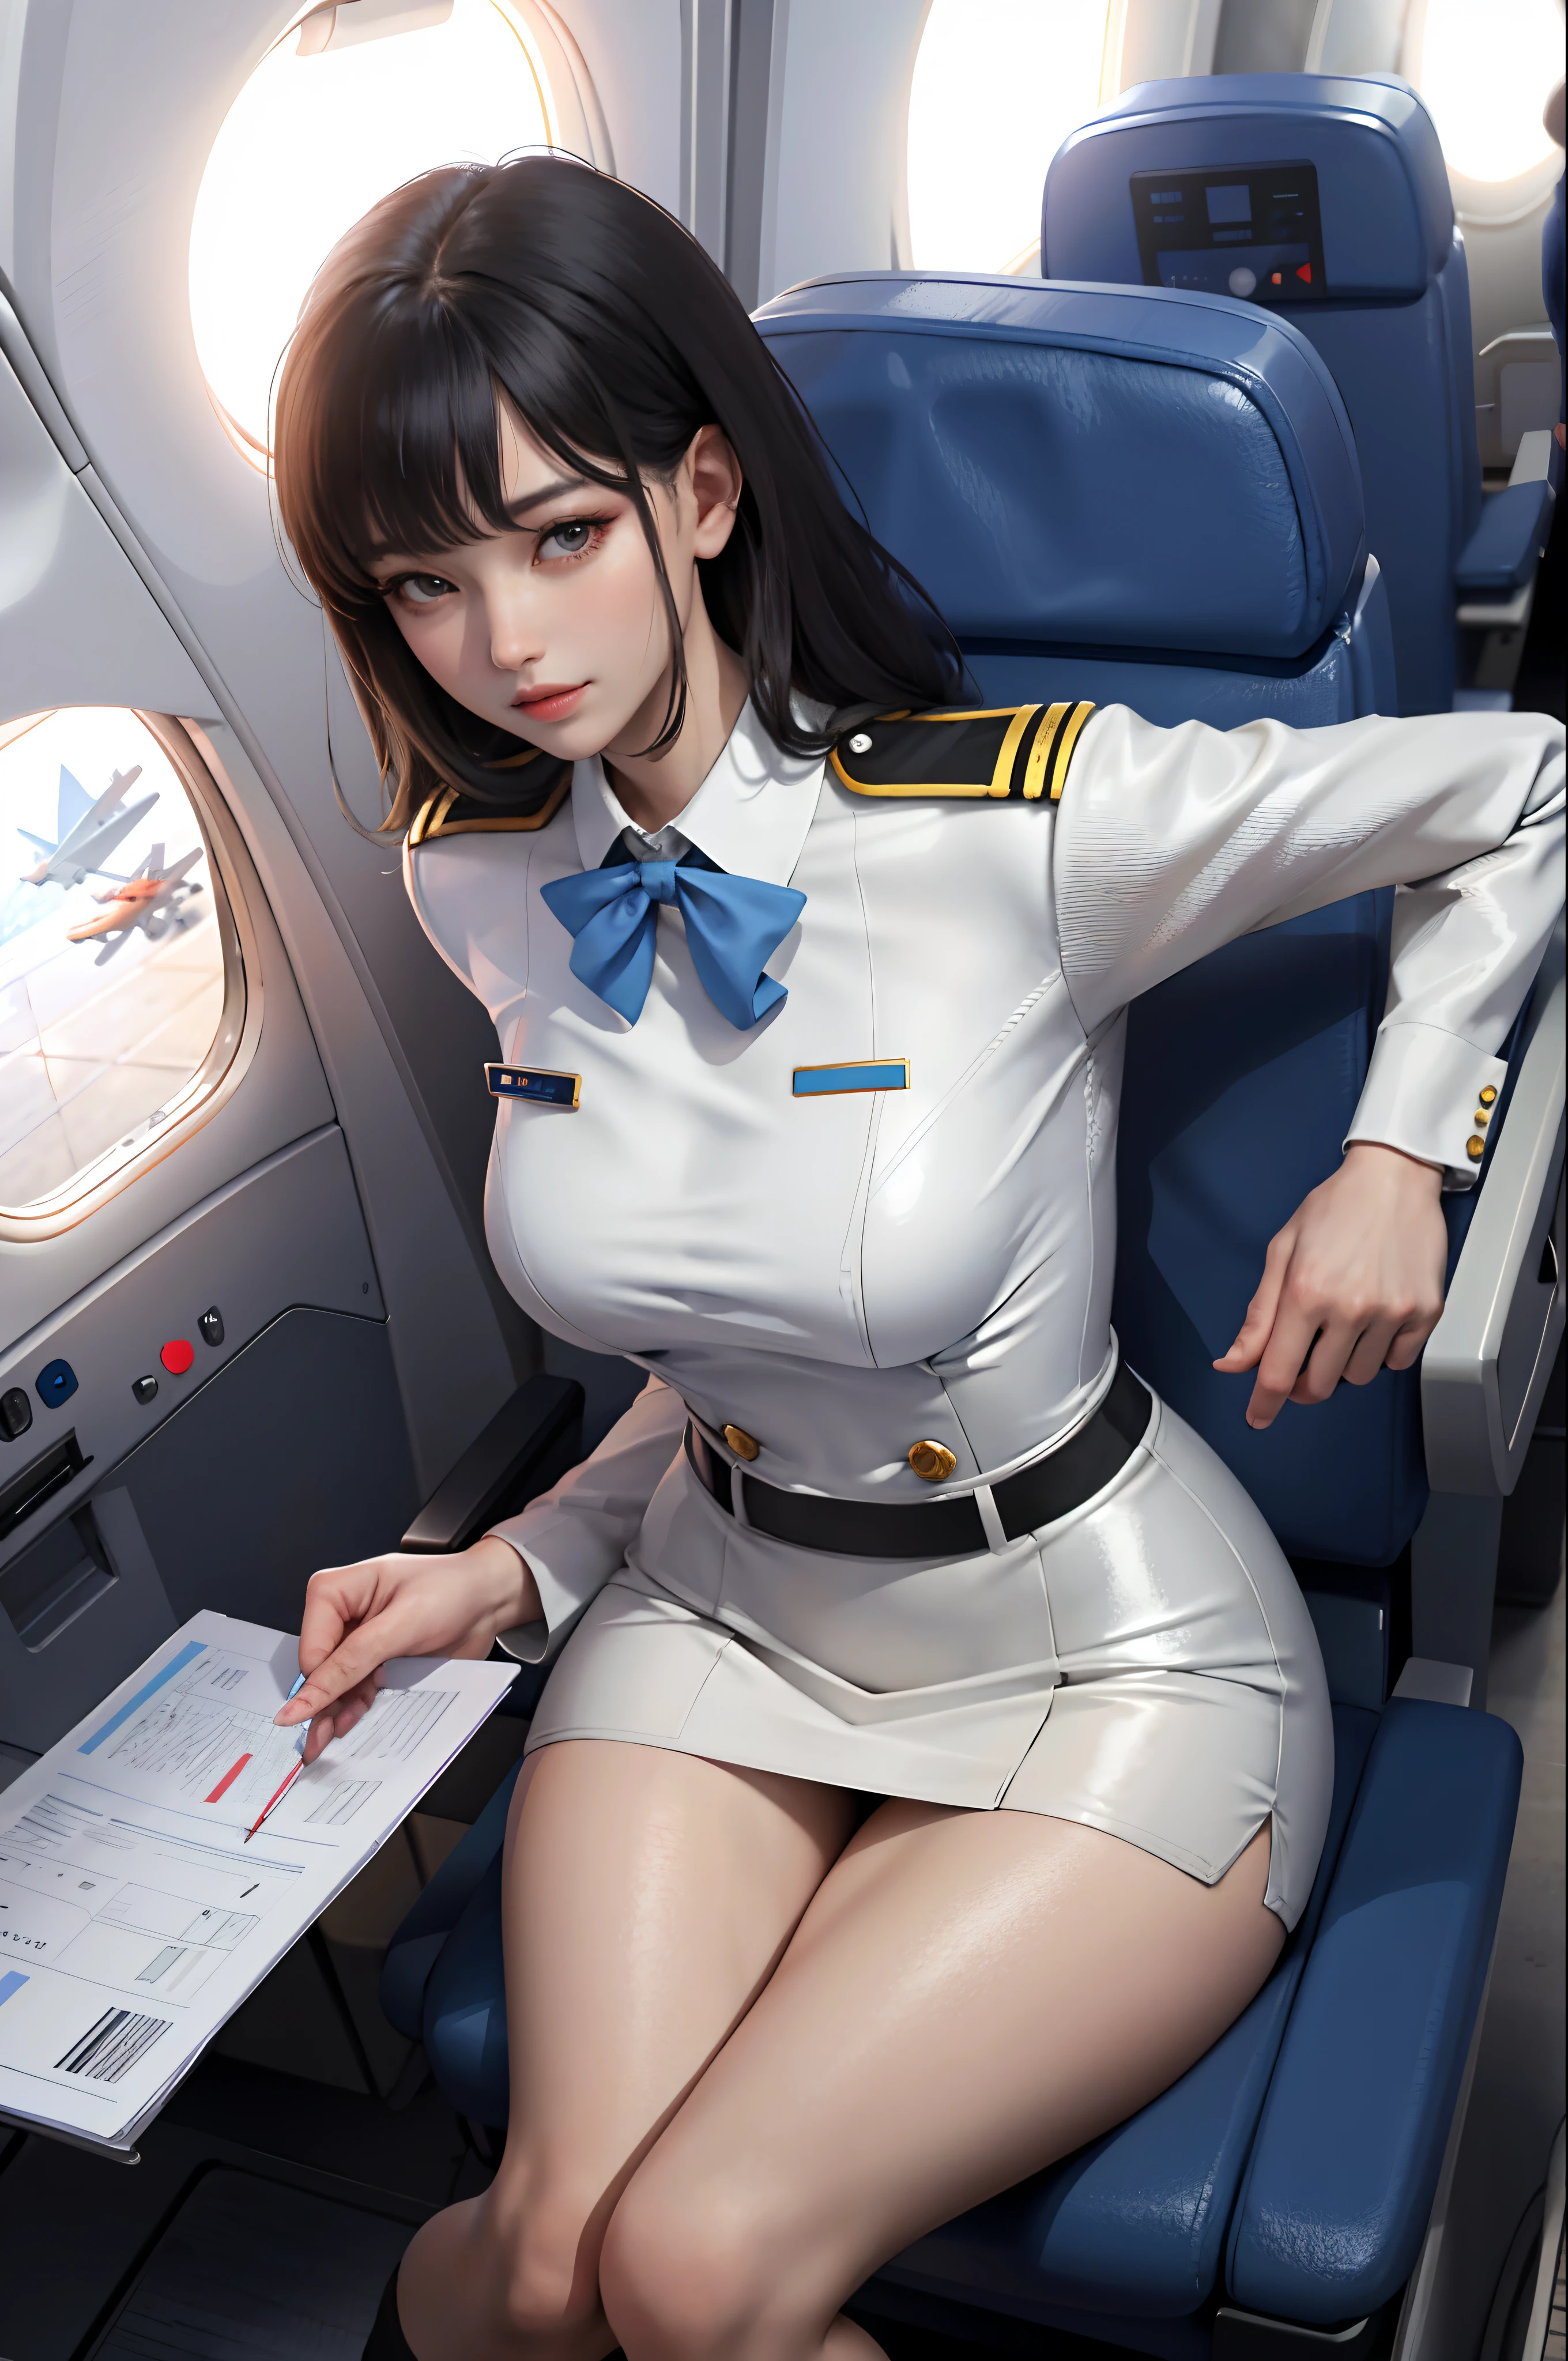 (masterpiece:1.2, best quality), 1lady, solo, Flight attendant, tight Uniform, perfect hands, Airplane, Serving passengers, Providing safety instructions, Responding to emergencies, bangs, (shiny skin:1.15),